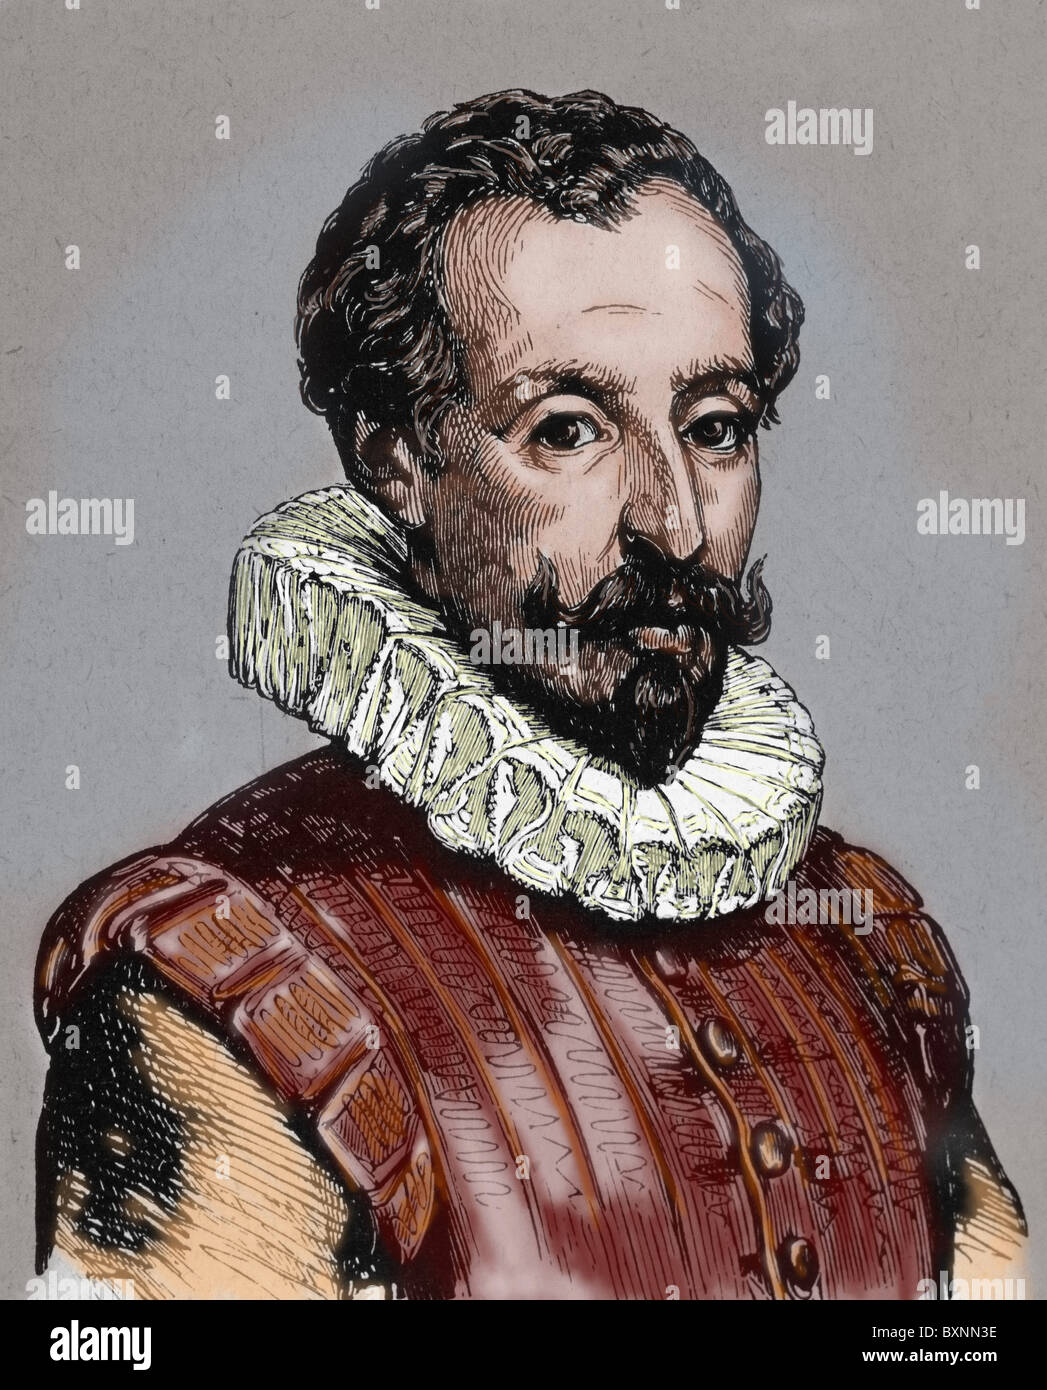 CERVANTES, Miguel de (1547-1616). Spanish novelist, poet, and playwright. Colored engraving. Stock Photo